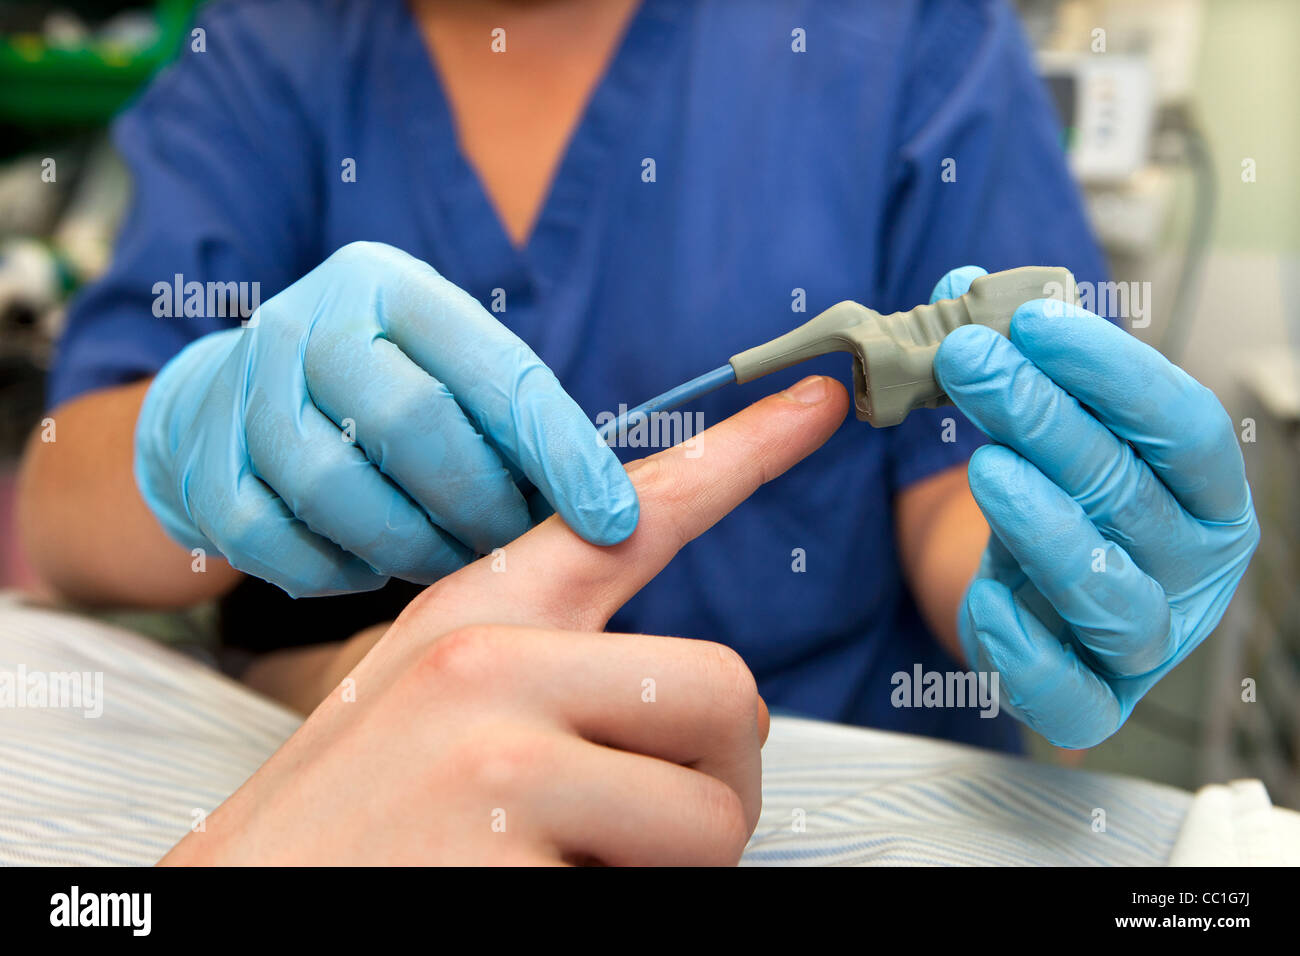 Arterial oxygenation being measured using pulse oximetry before surgical operation Stock Photo